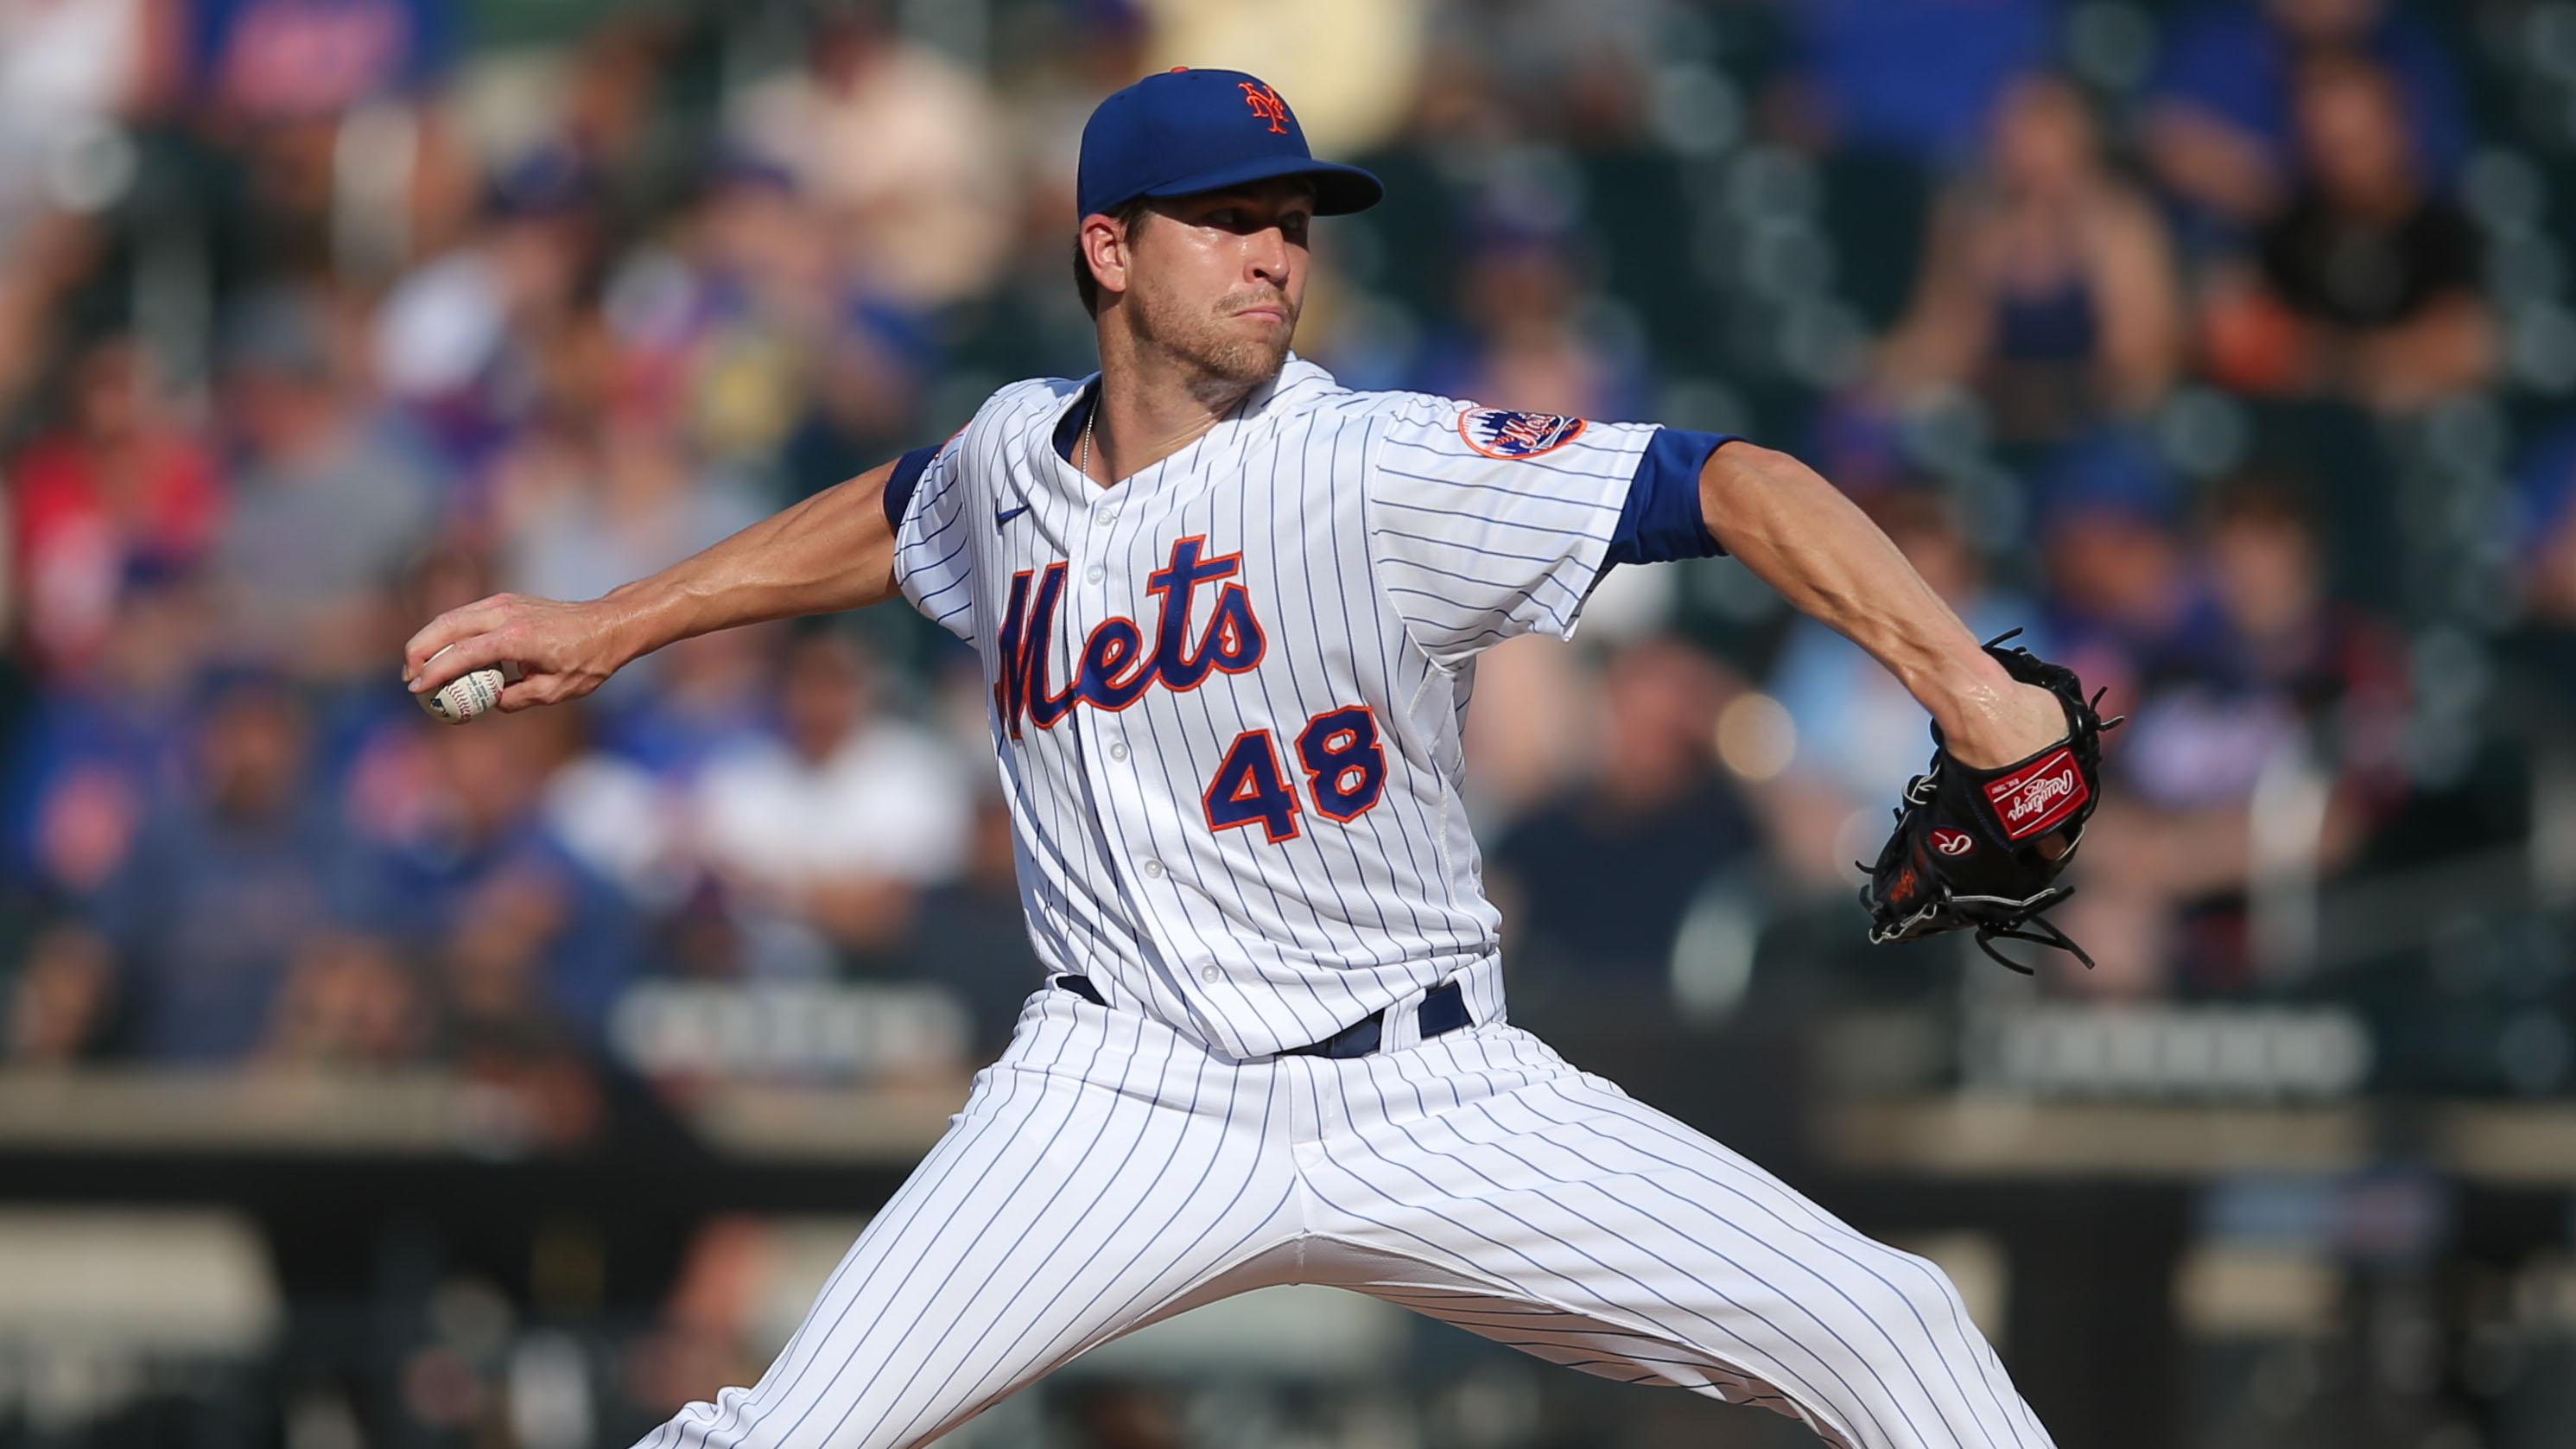 Jun 21, 2021; New York City, New York, USA; New York Mets starting pitcher Jacob deGrom (48) pitches against the Atlanta Braves during the third inning at Citi Field. / Brad Penner-USA TODAY Sports